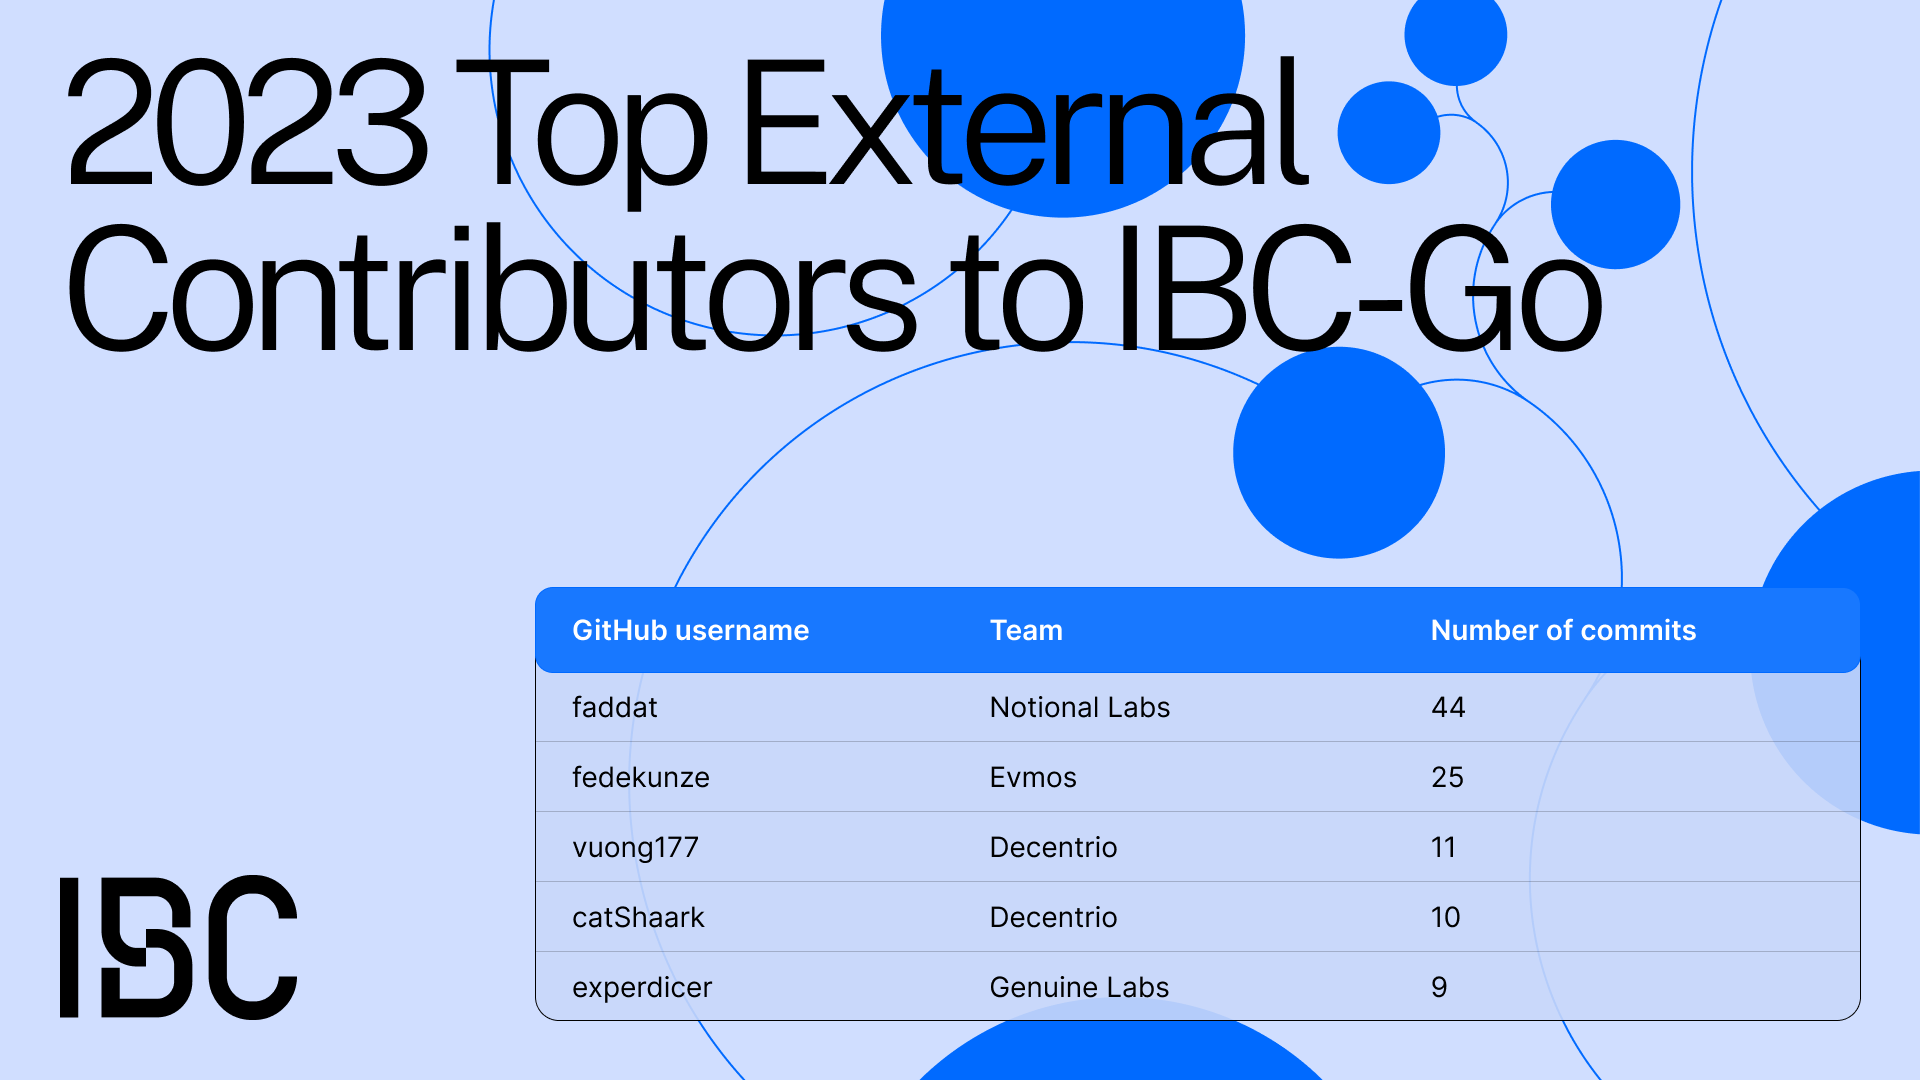 Top external contributors to ibc-go in 2023